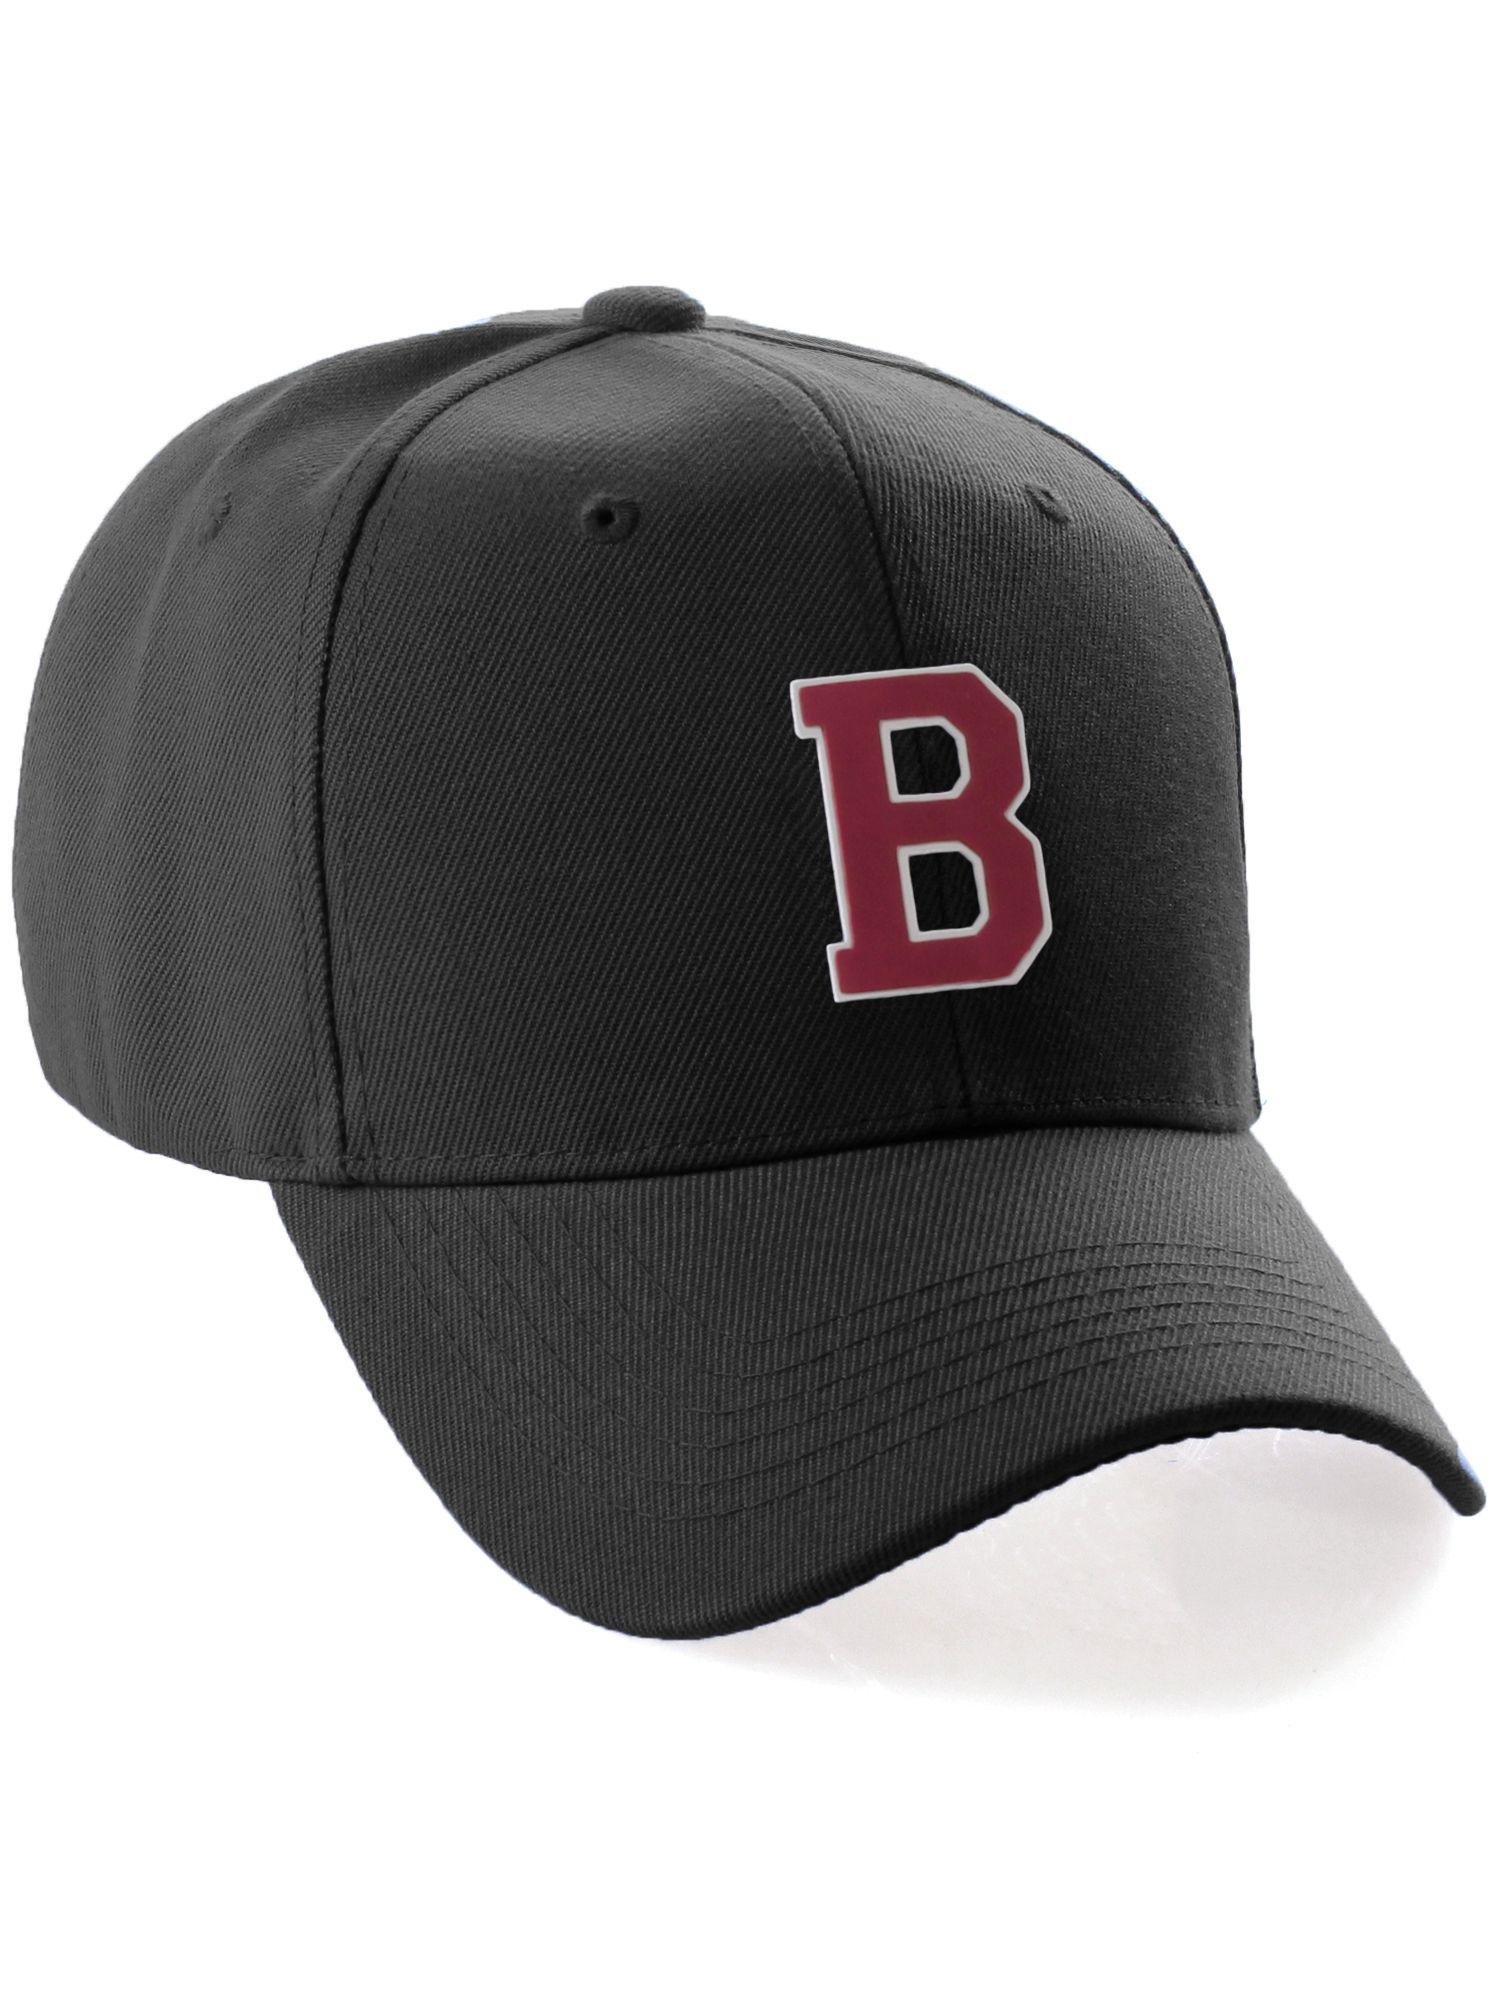 Black White with Red Letters Logo - Custom A-Z Initial Letters Baseball Hat Cap - Black Hat with White ...